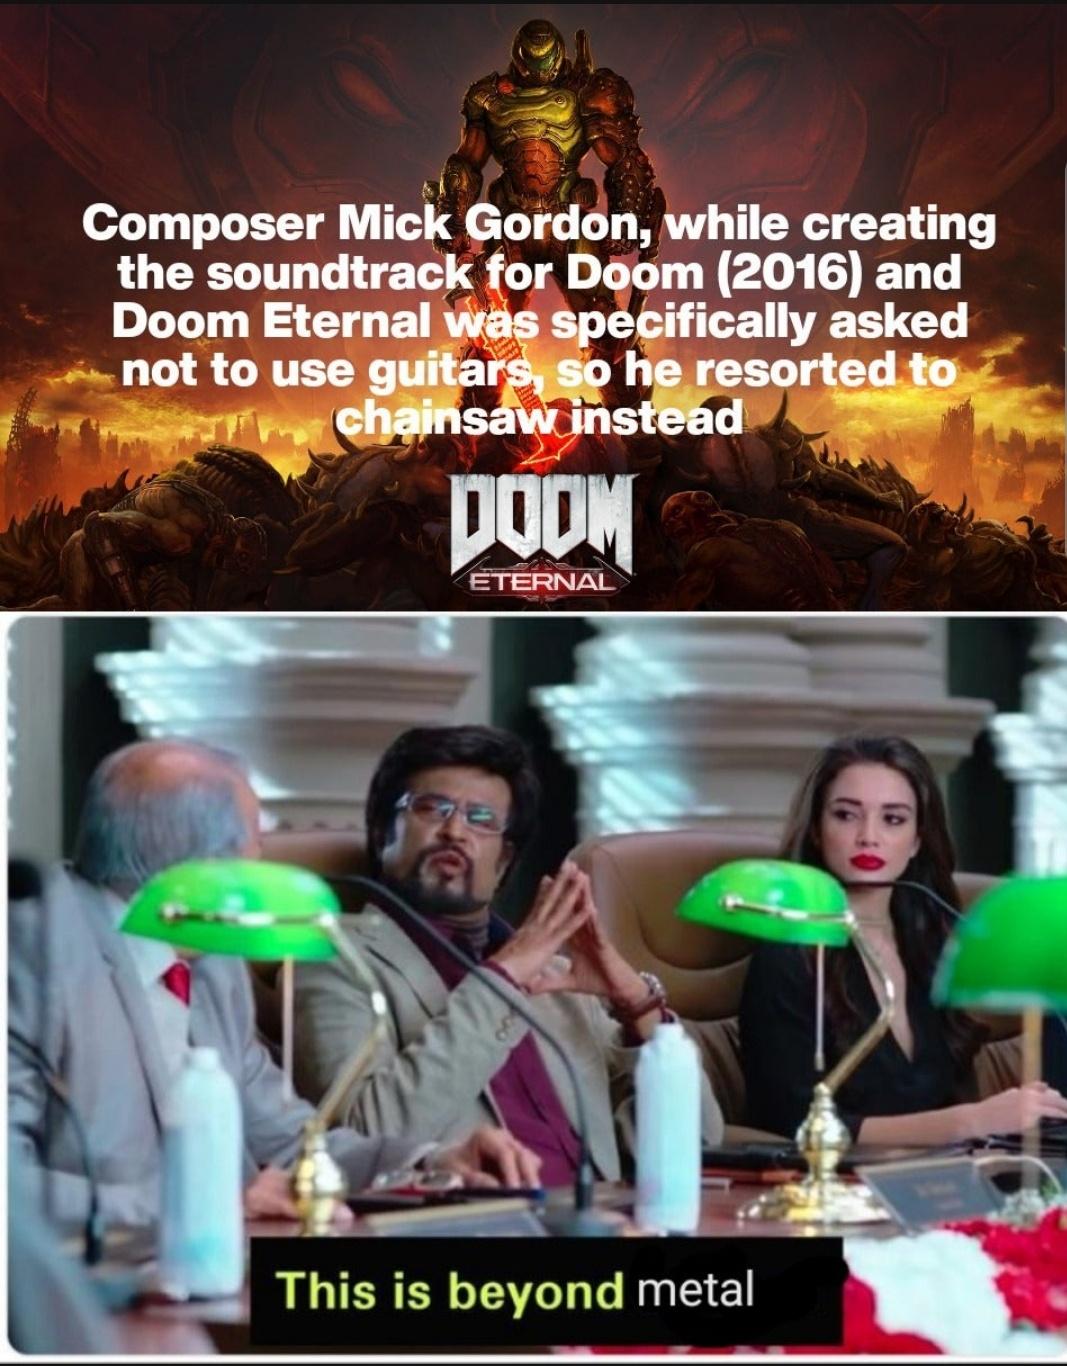 beyond science - Composer Mick Gordon, while creating the soundtrack for Doom 2016 and Doom Eternal was specifically asked not to use guitars, so he resorted to chainsaw instead Doom Eternal This is beyond metal